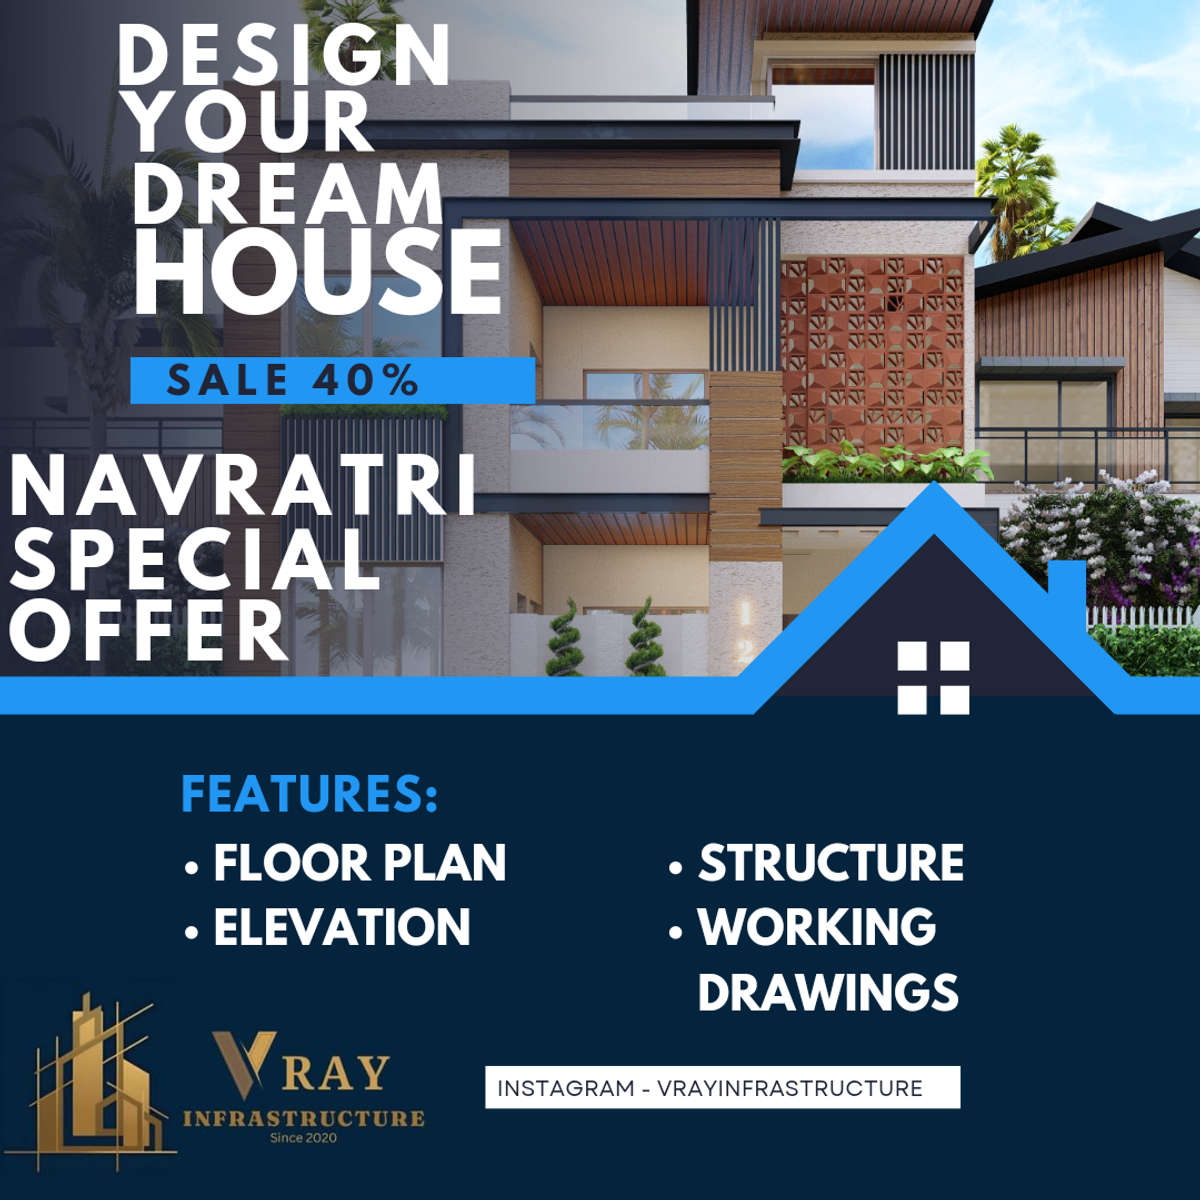 Designs by Architect VRAY Infrastructure, Indore | Kolo